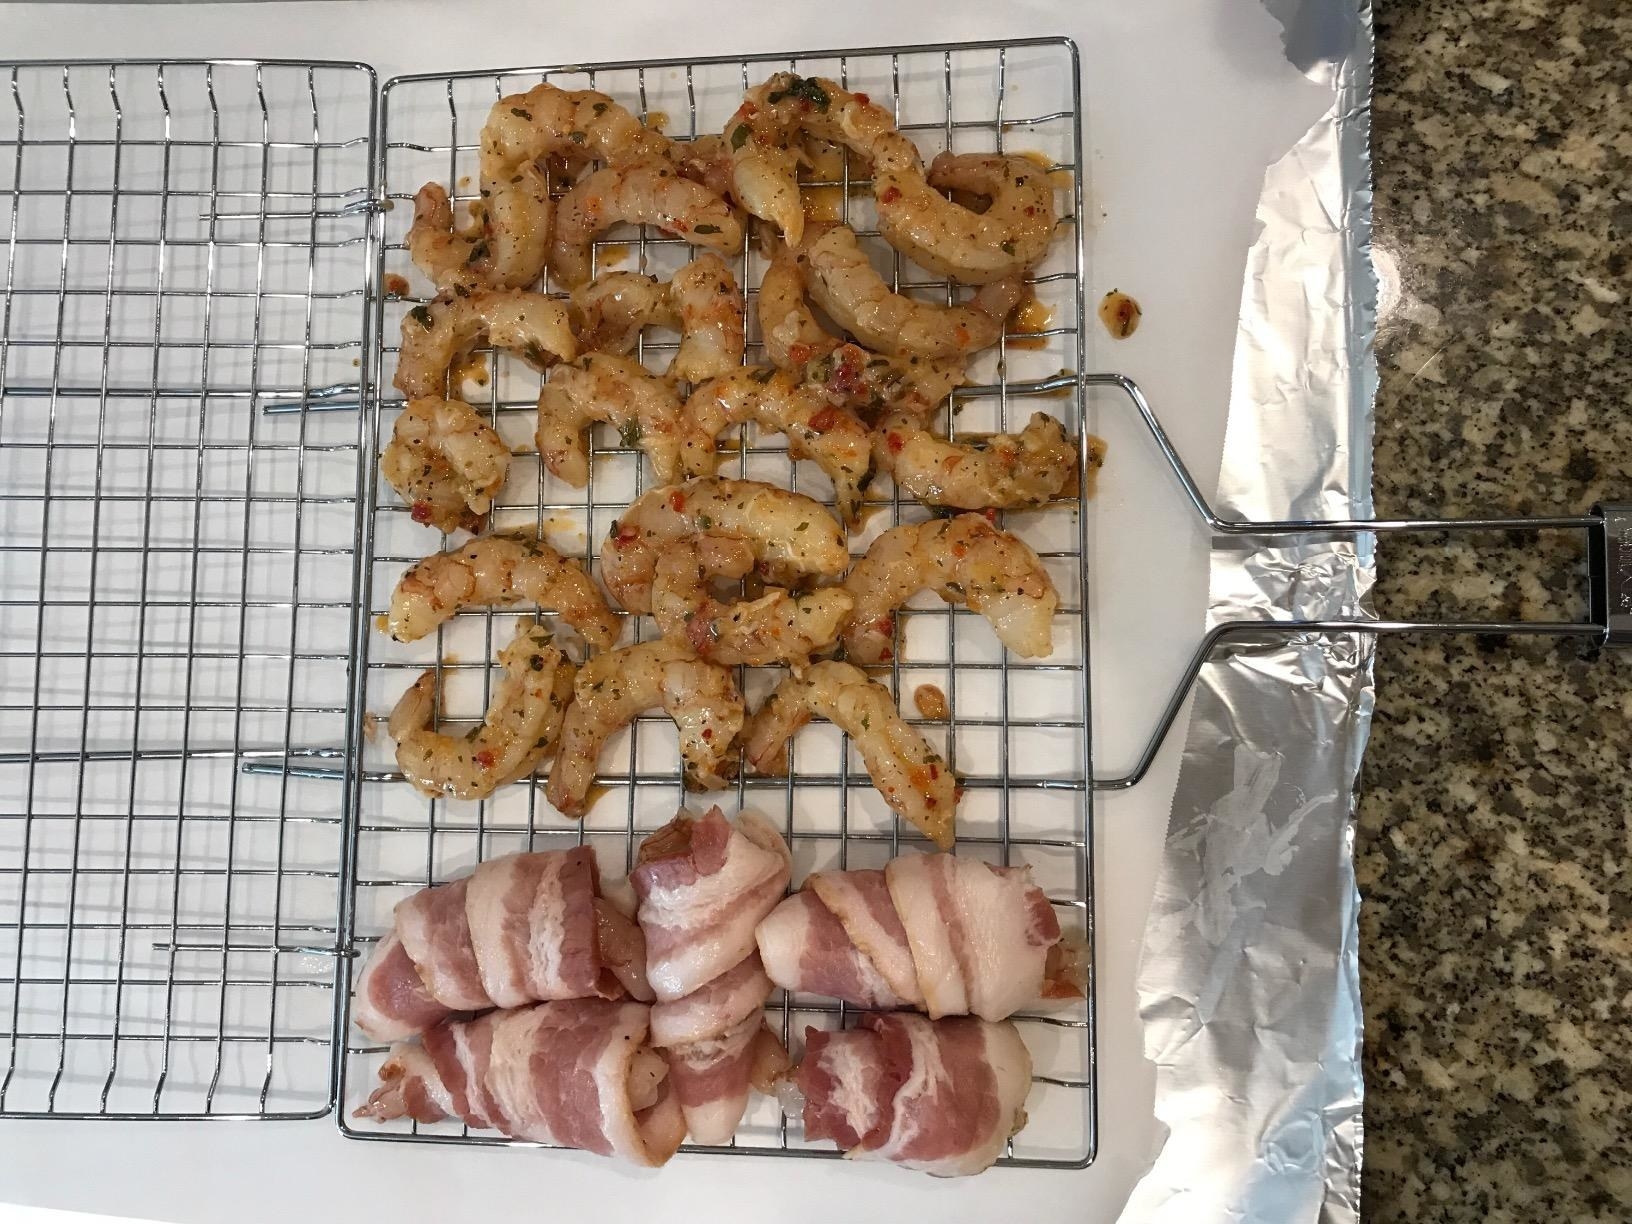 Bacon-wrapped shrimp and more shrimp in the grilling basket.